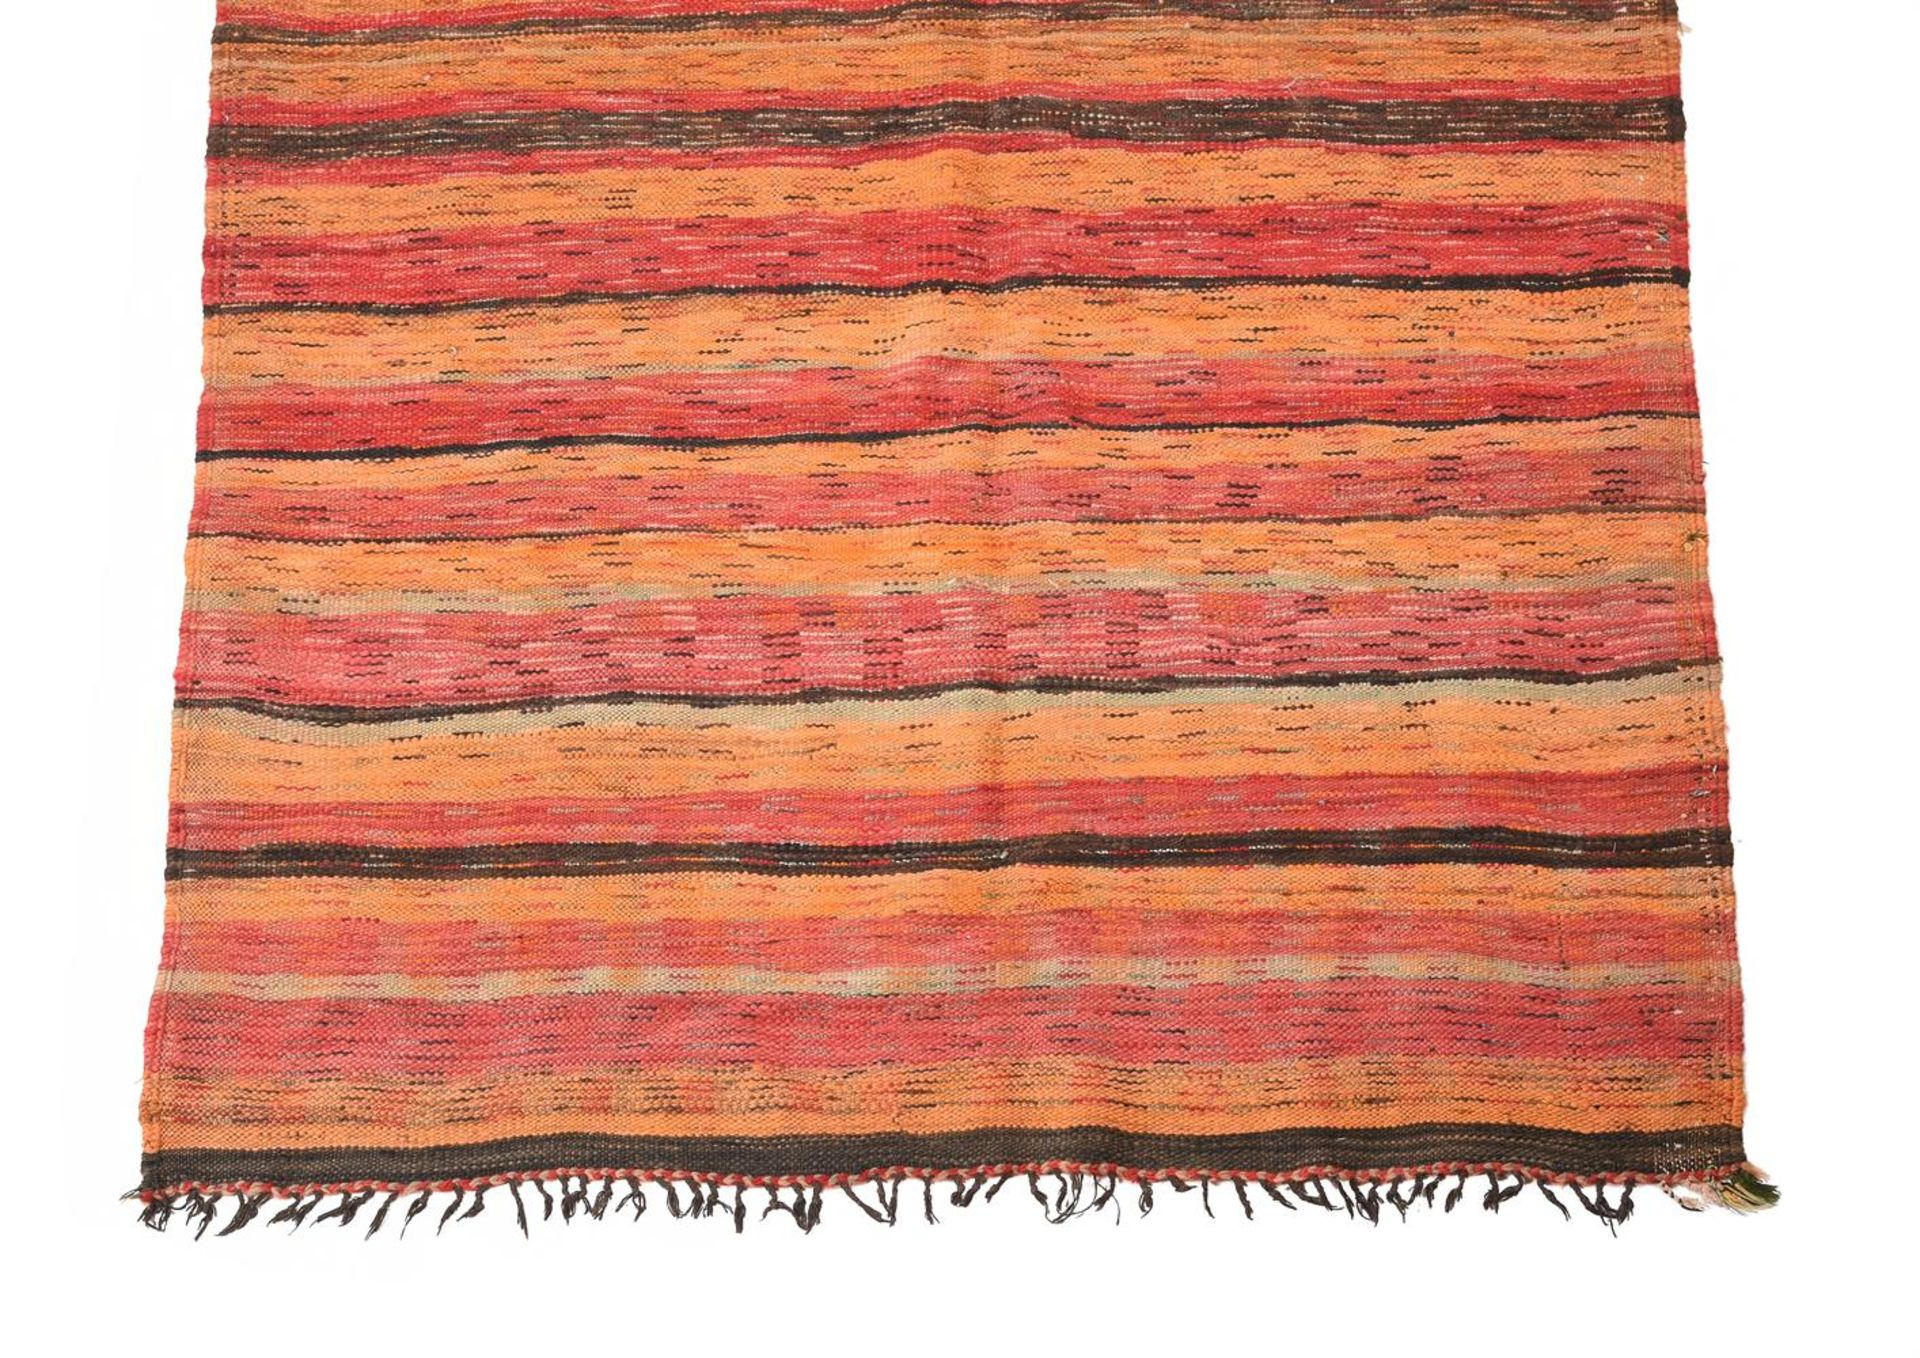 A FLAT WOVEN RUG - Image 2 of 2